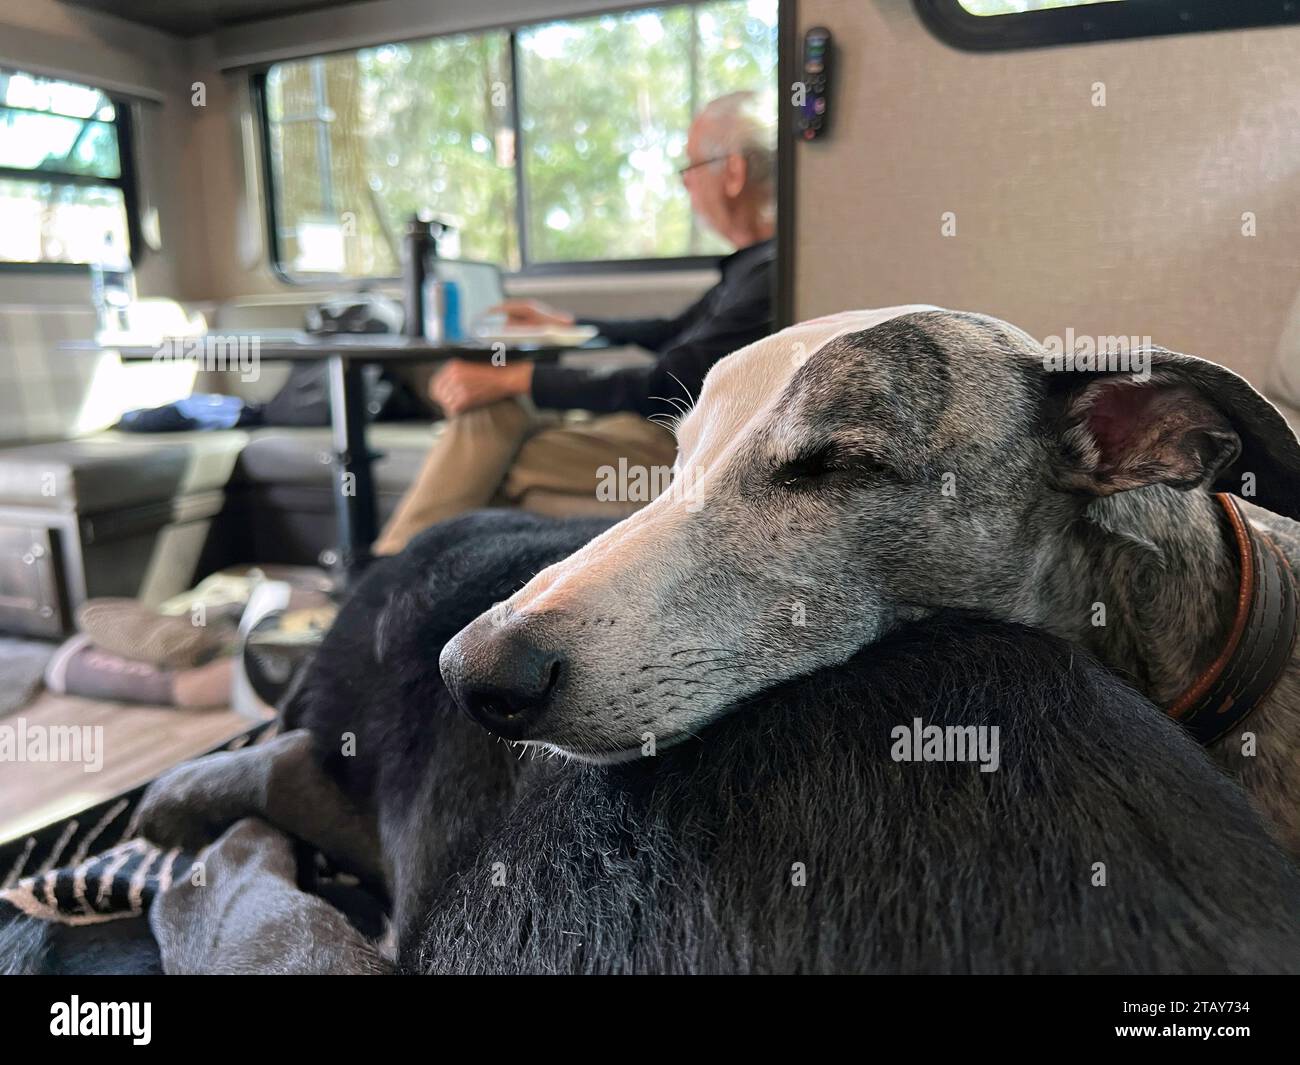 A senior whippet sleeps comfortably on his black lab brother in their RV while a senior man reads his tablet in the background, Stock Photo